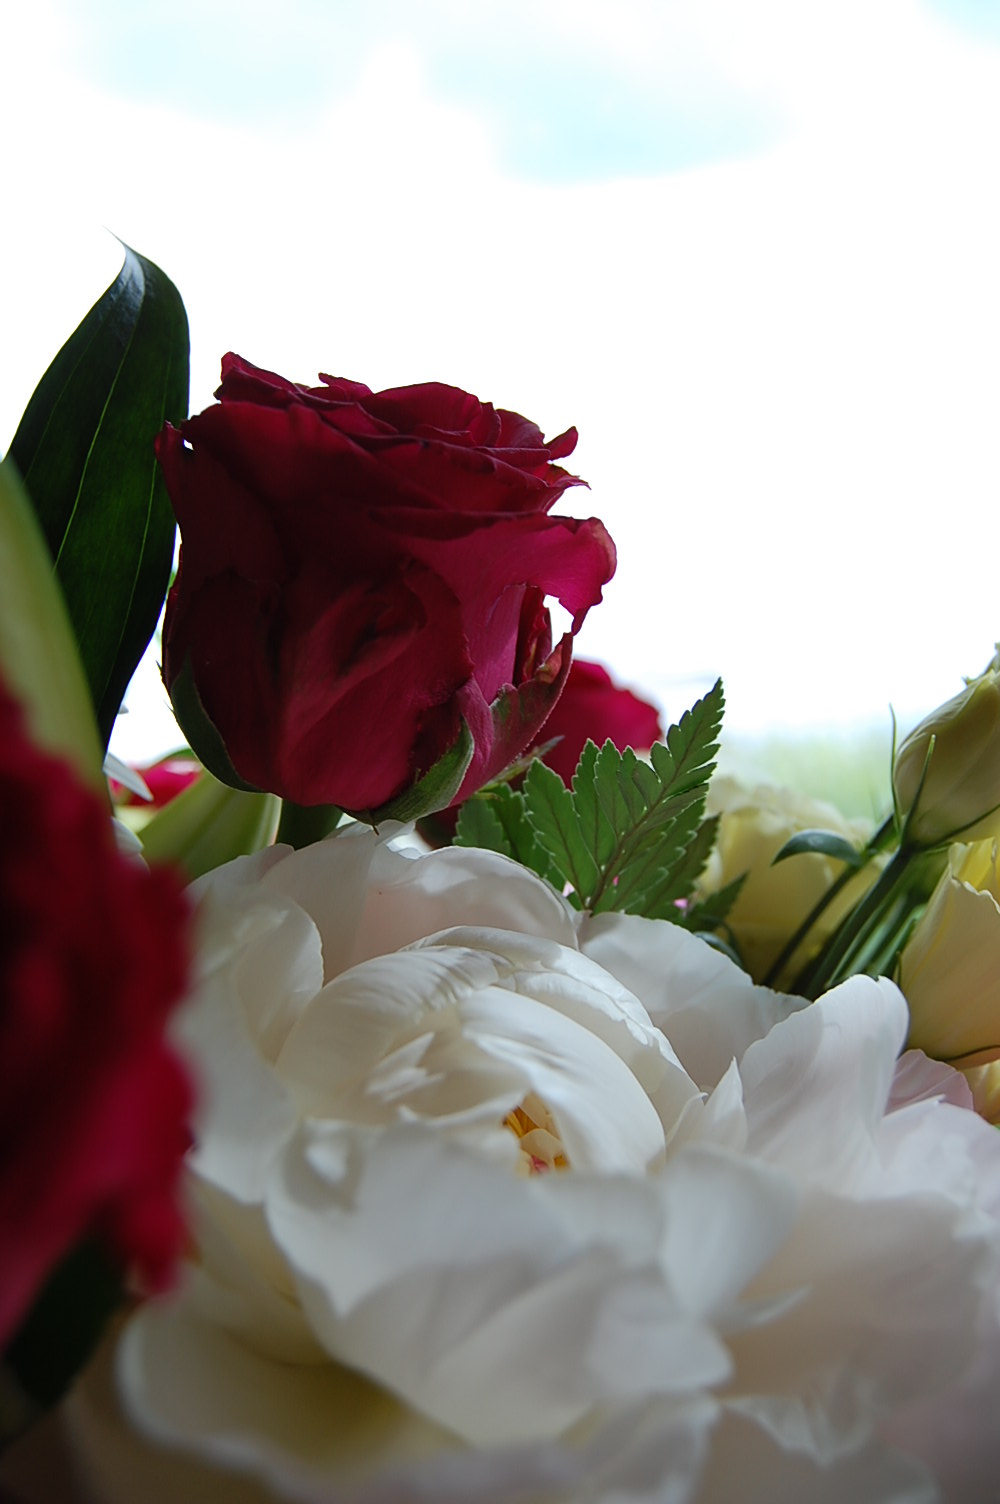 a variety of roses is shown close up